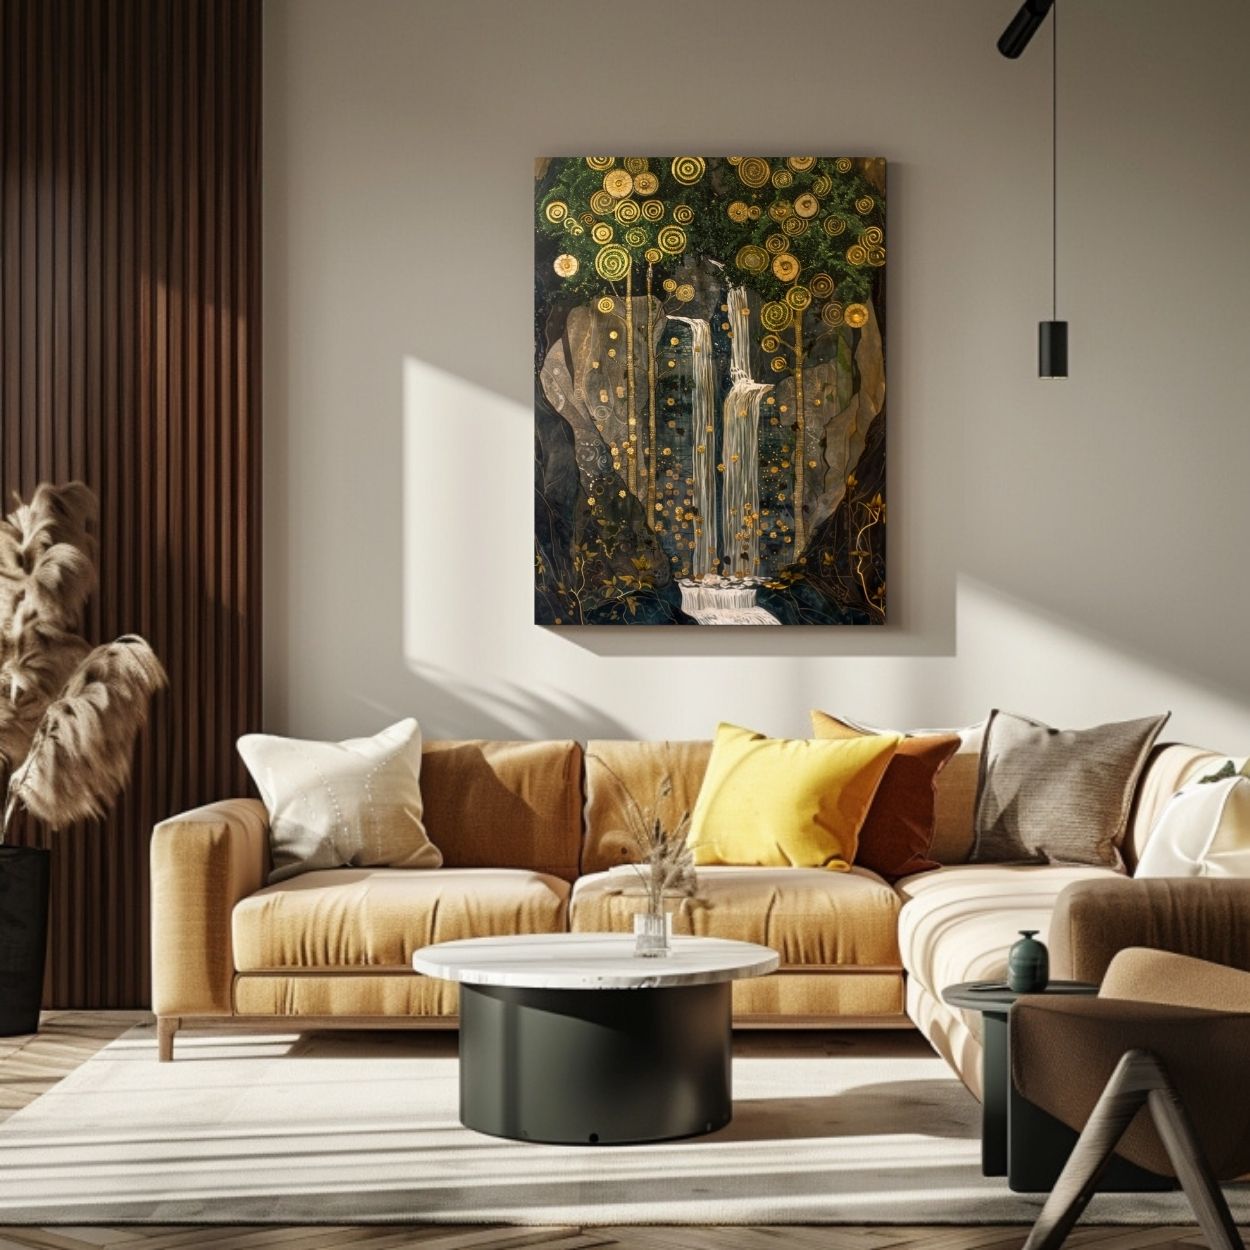 Product image of canvas print wall art featuring a waterfall surrounded by golden trees in a living room